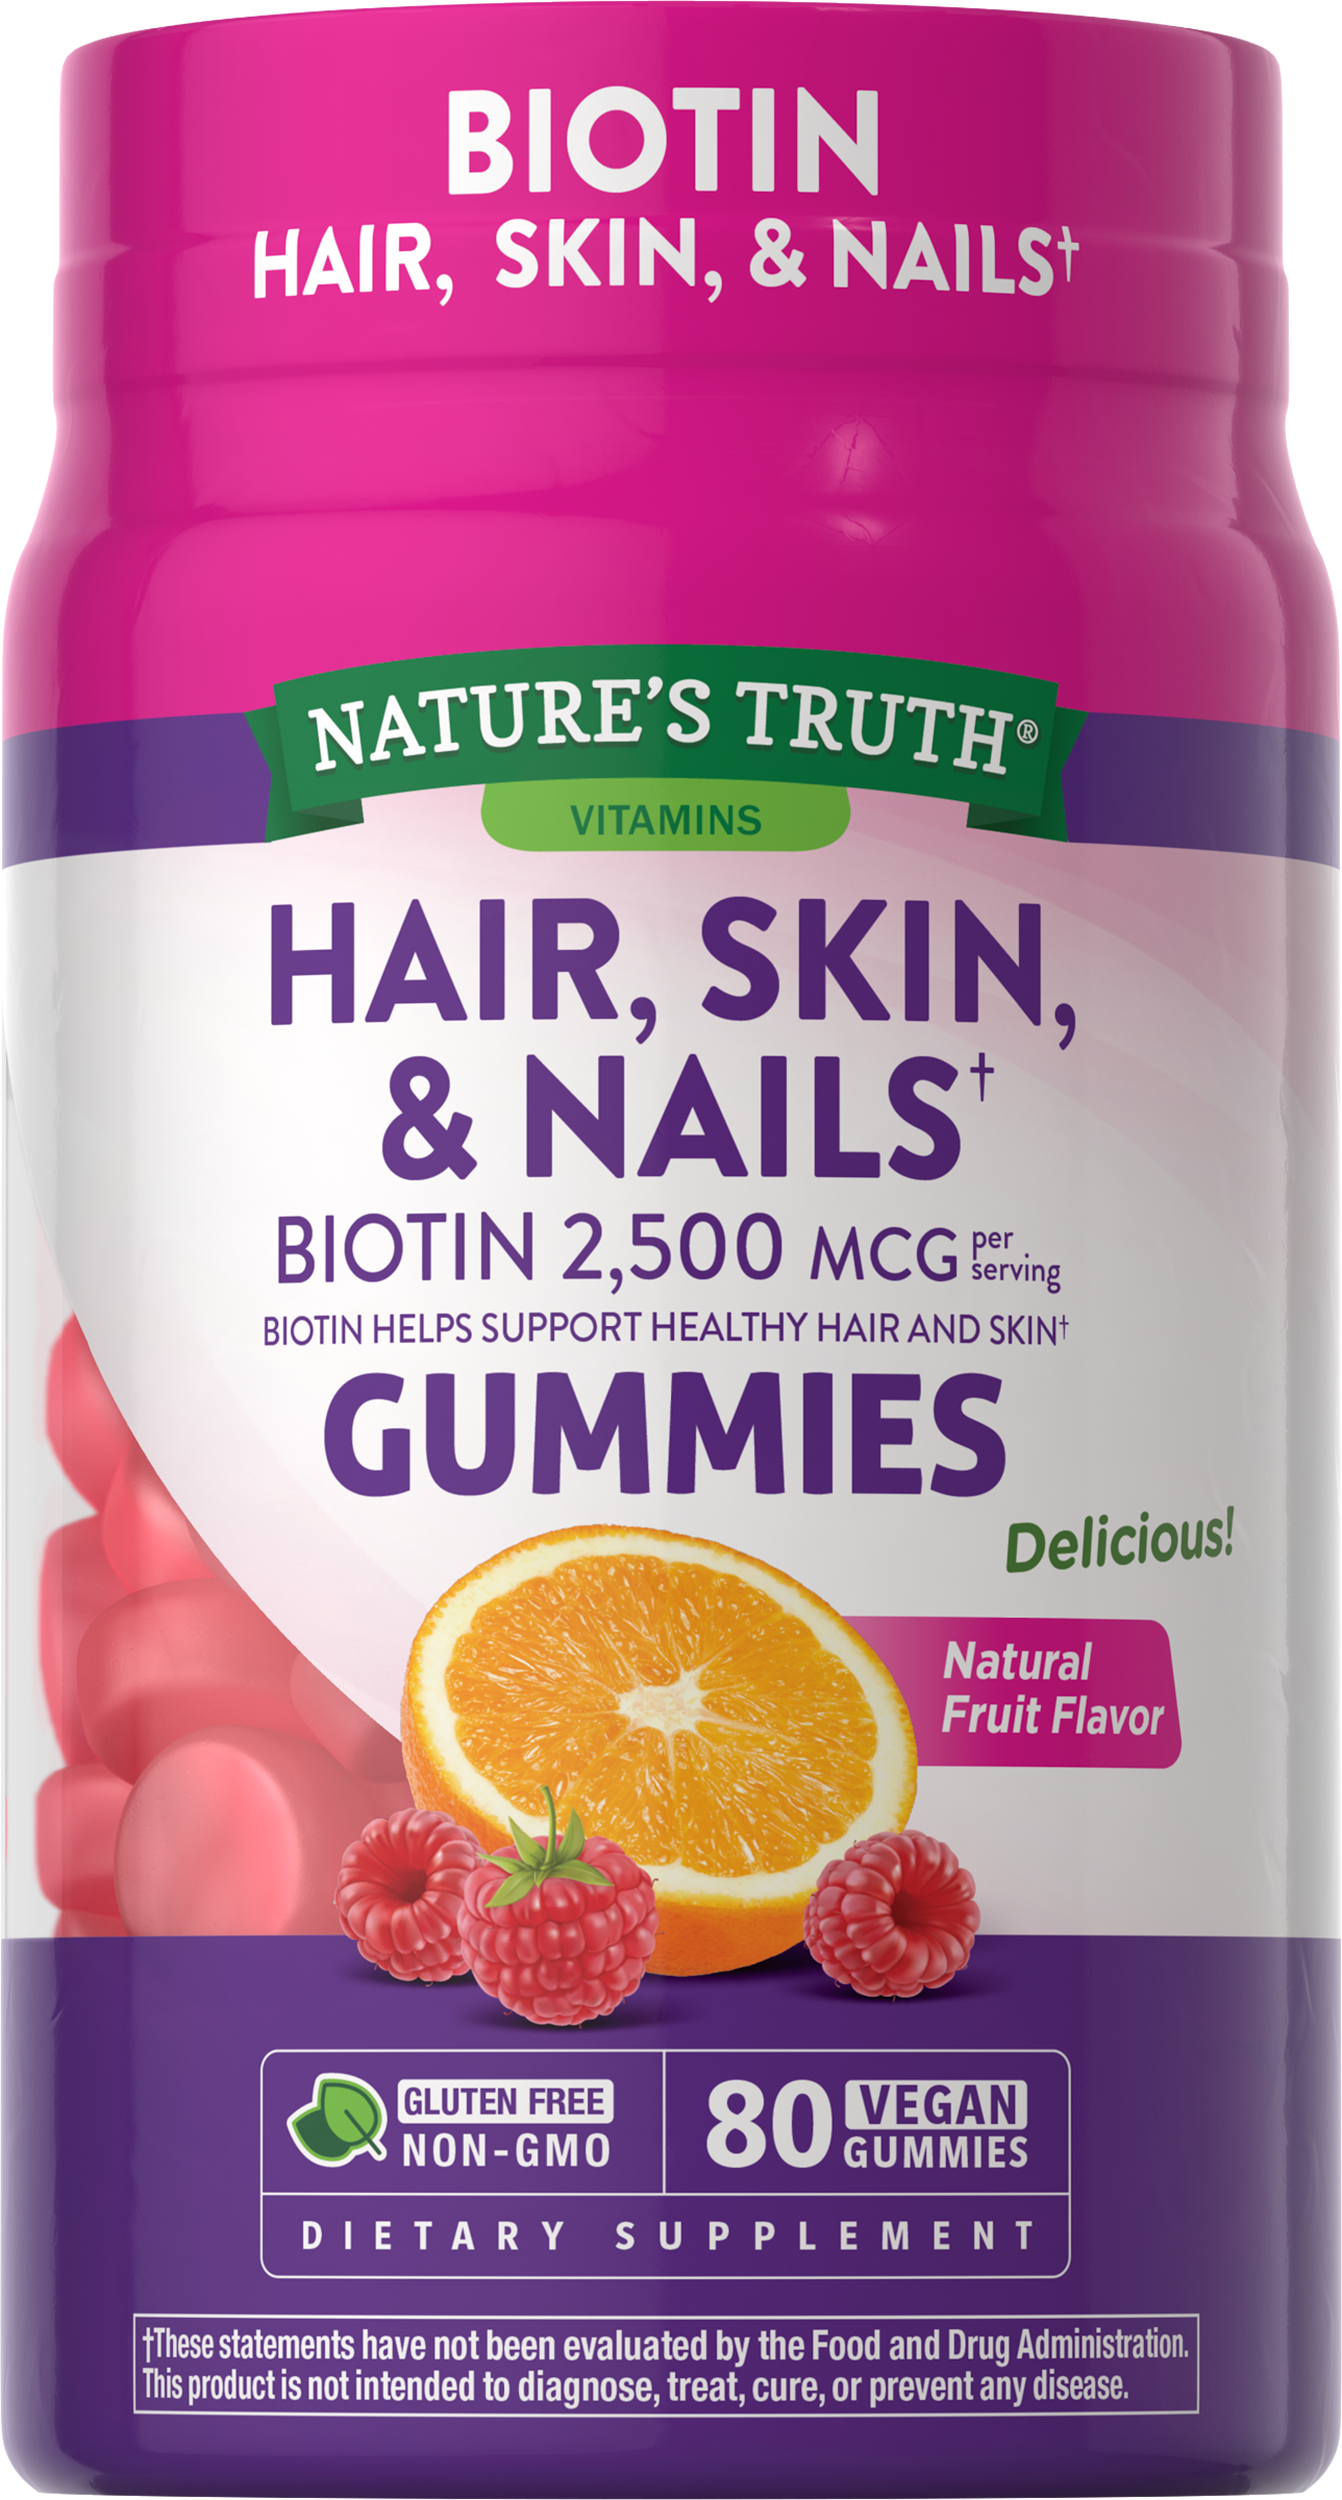 Hair Skin and Nails with 2500 mcg of Biotin